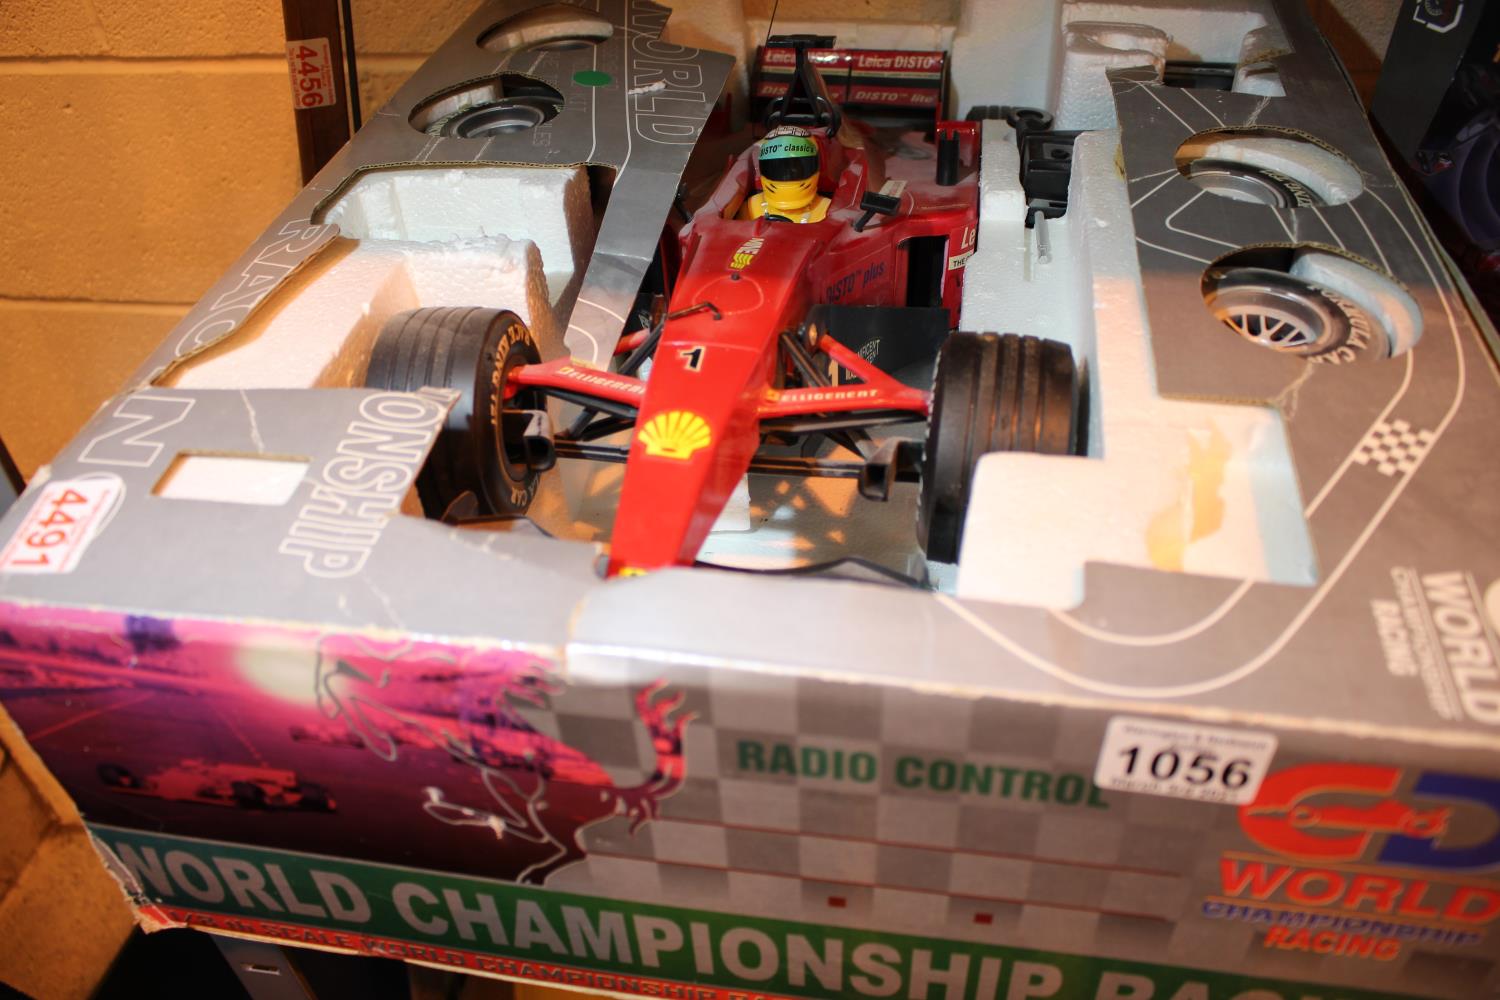 GD World Championship racing remote control F1 racing car. P&P Group 3 (£25+VAT for the first lot